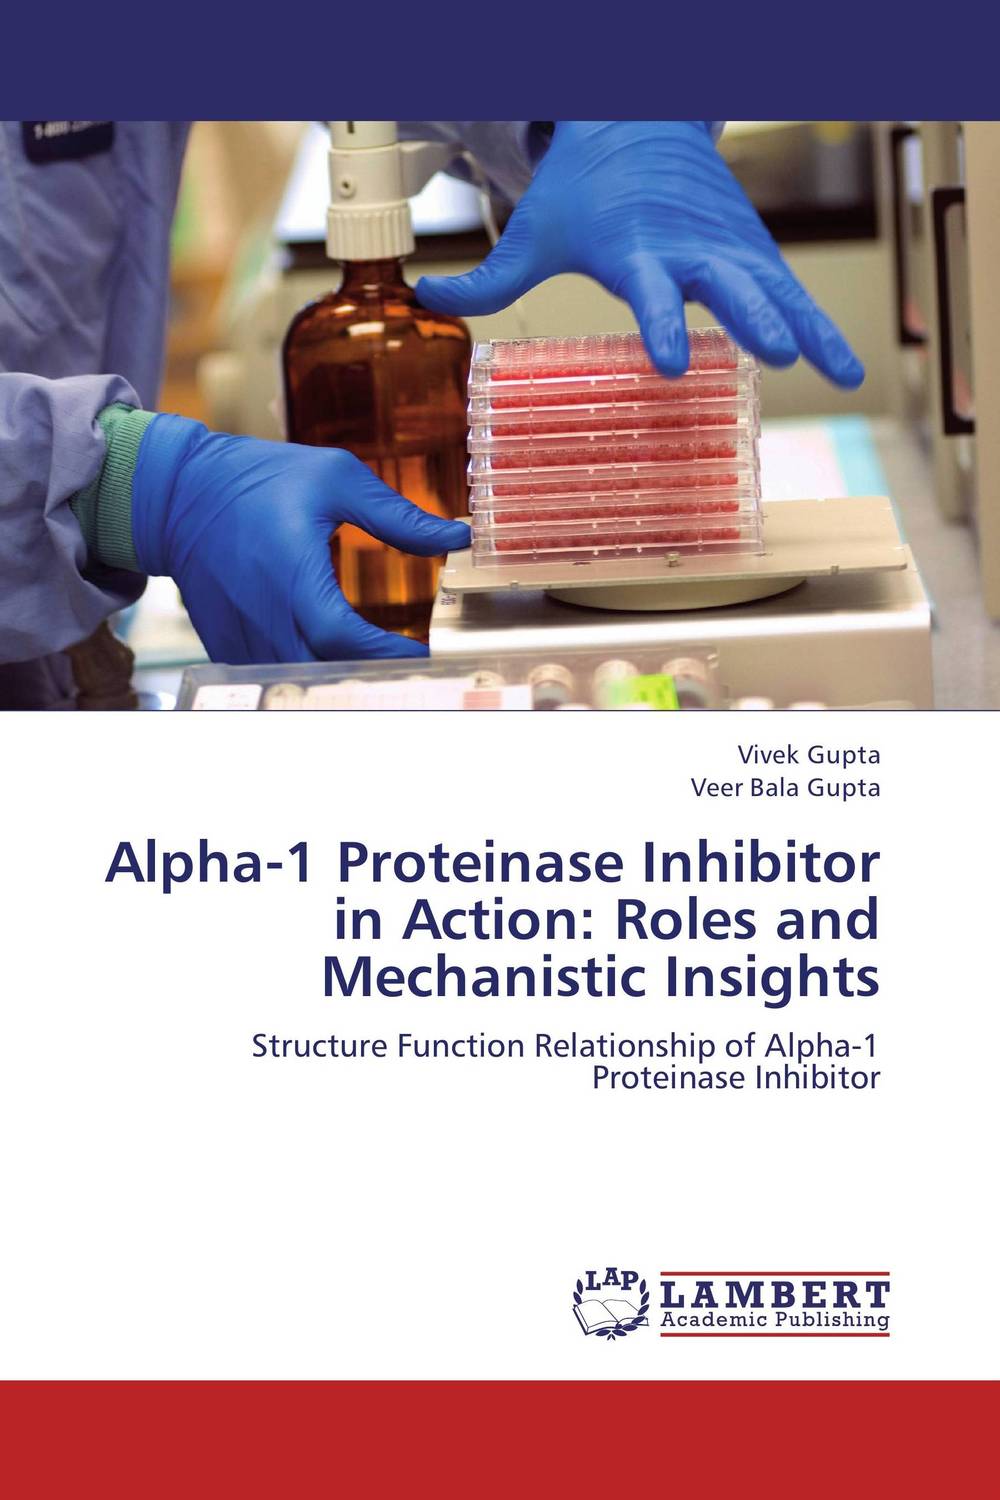 Alpha-1 Proteinase Inhibitor in Action: Roles and Mechanistic Insights